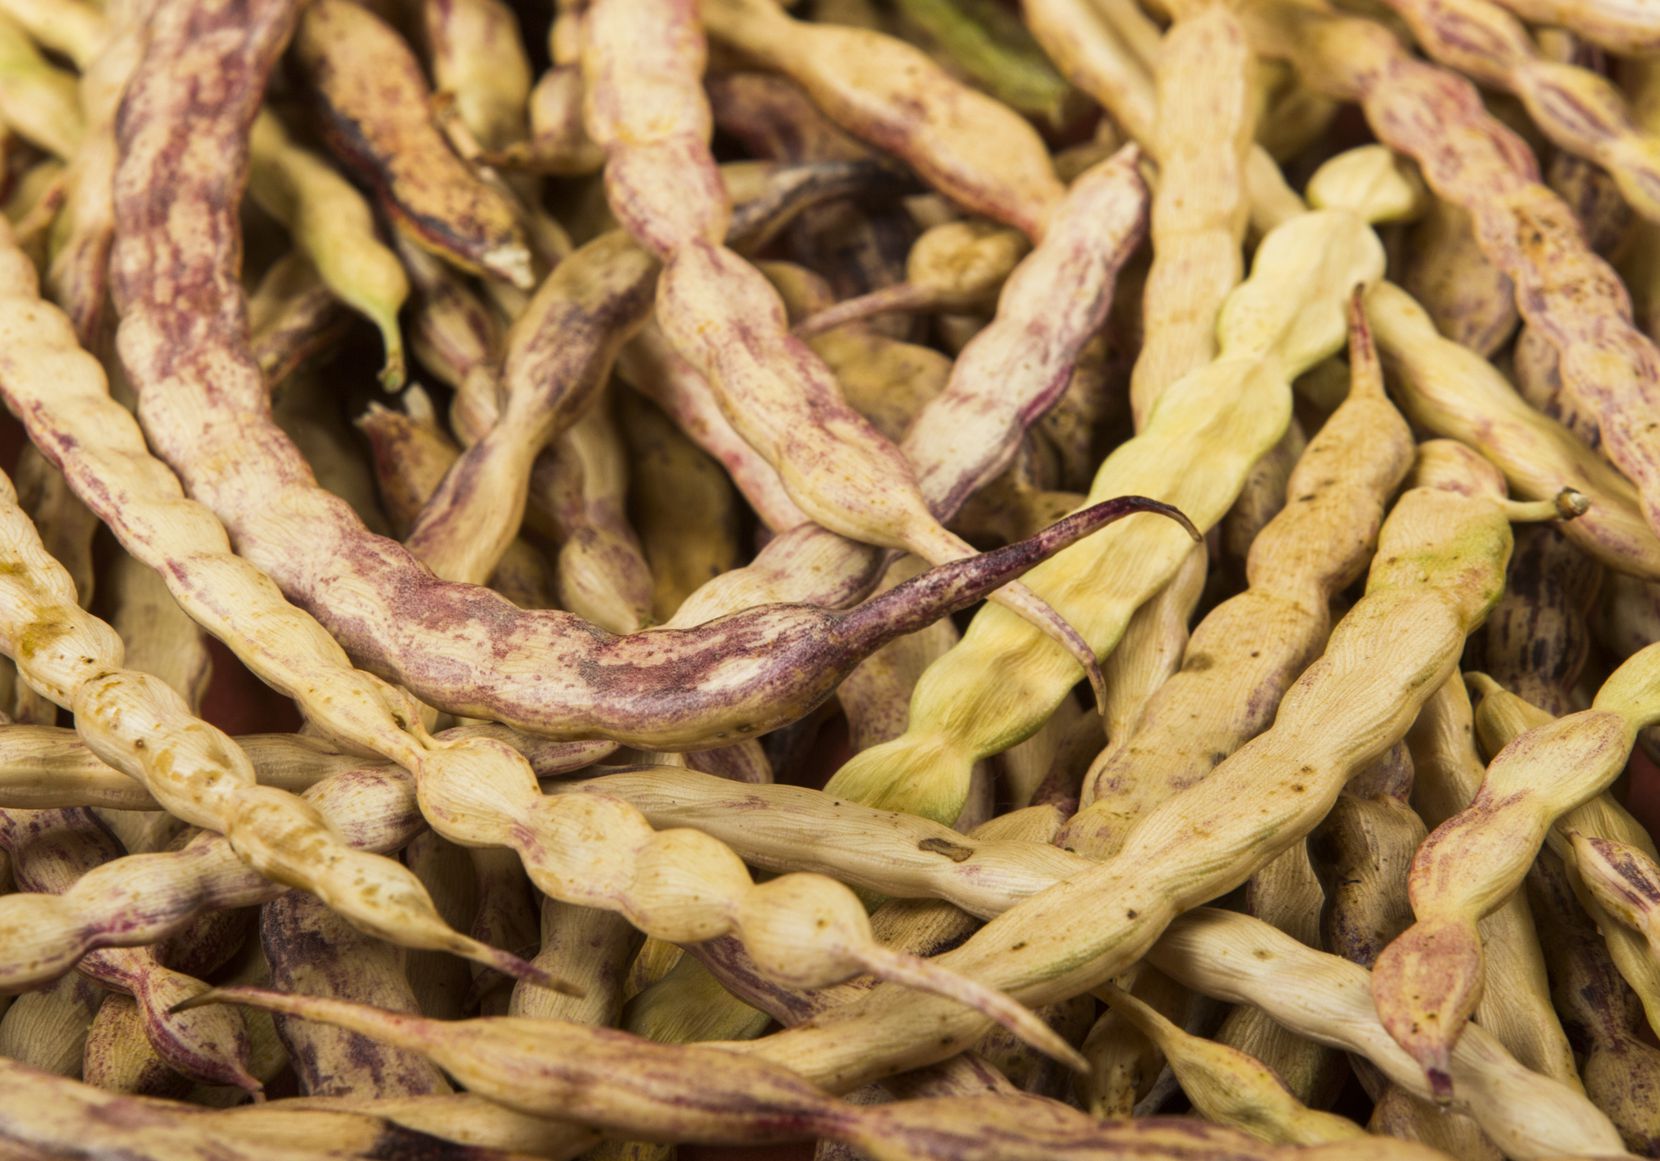 Are mesquite beans the next gluten-free superfood?